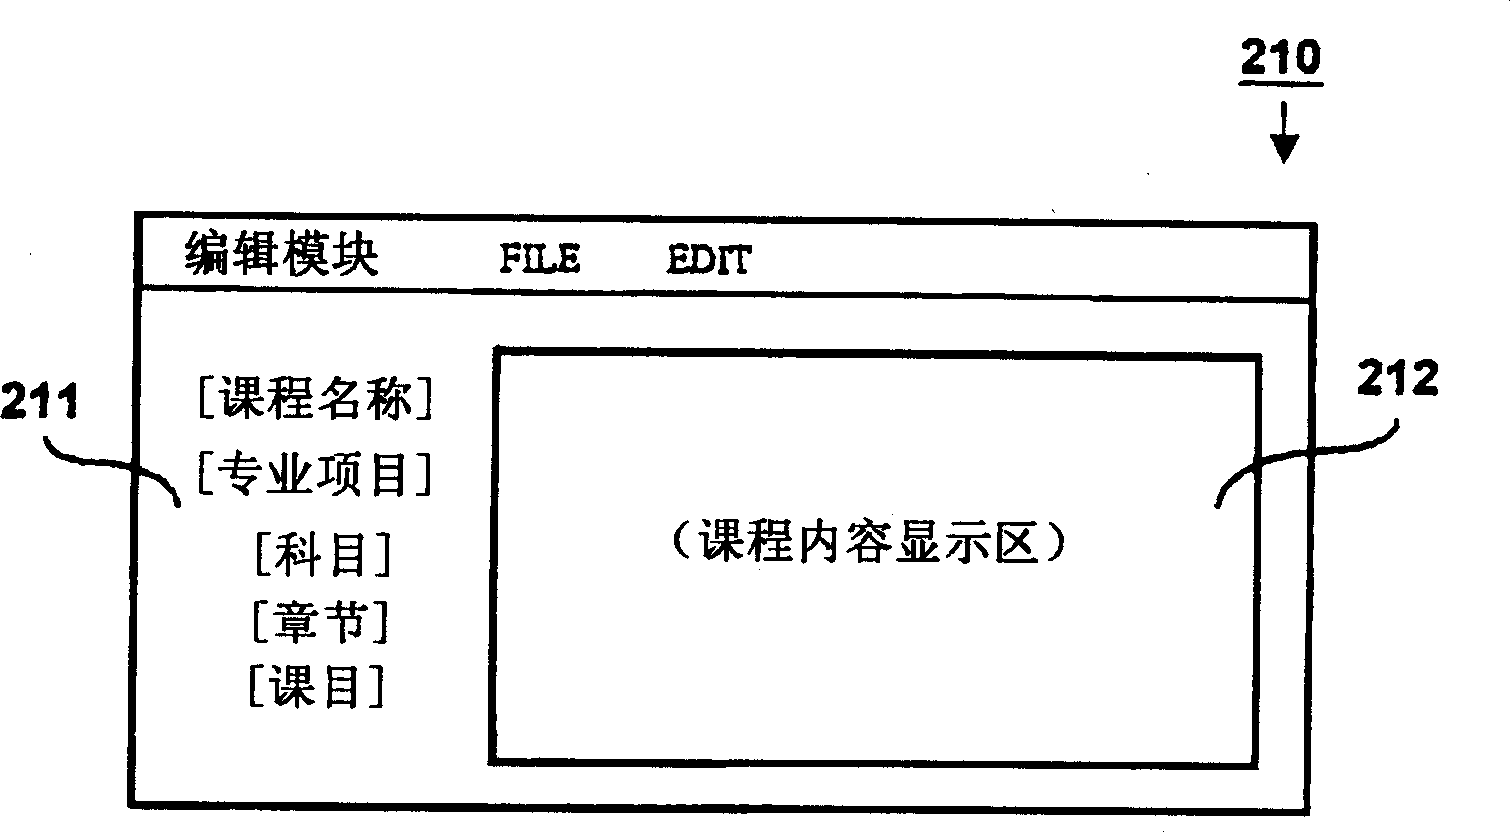 Network type online teaching program editing system and method thereof